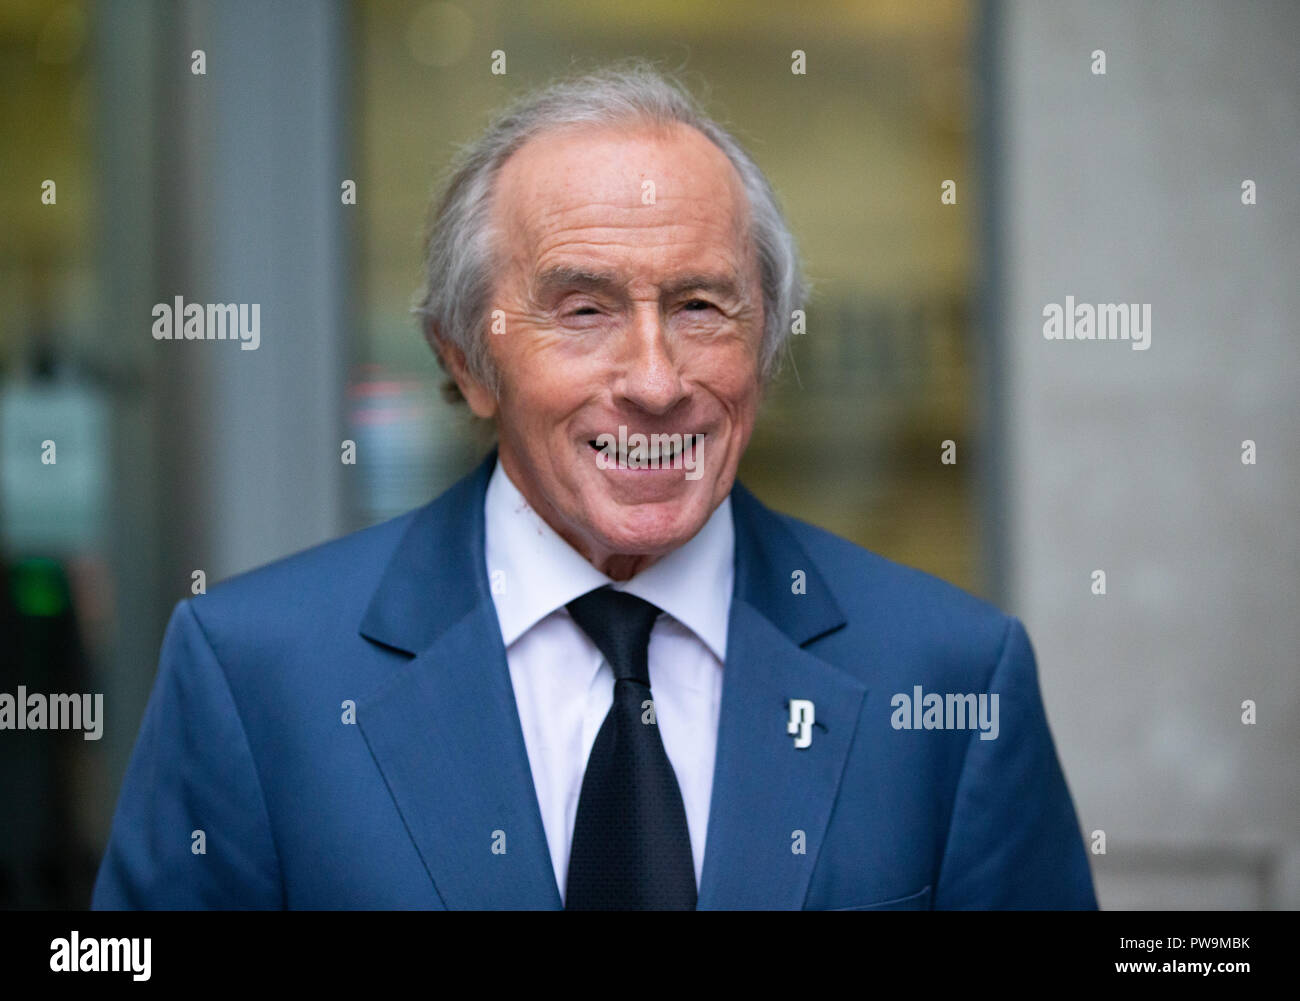 Legendary Formula One Racing driver, Sir Jackie Stewart, leaves the BBC after appearing on 'The Andrew Marr Show'. Stock Photo